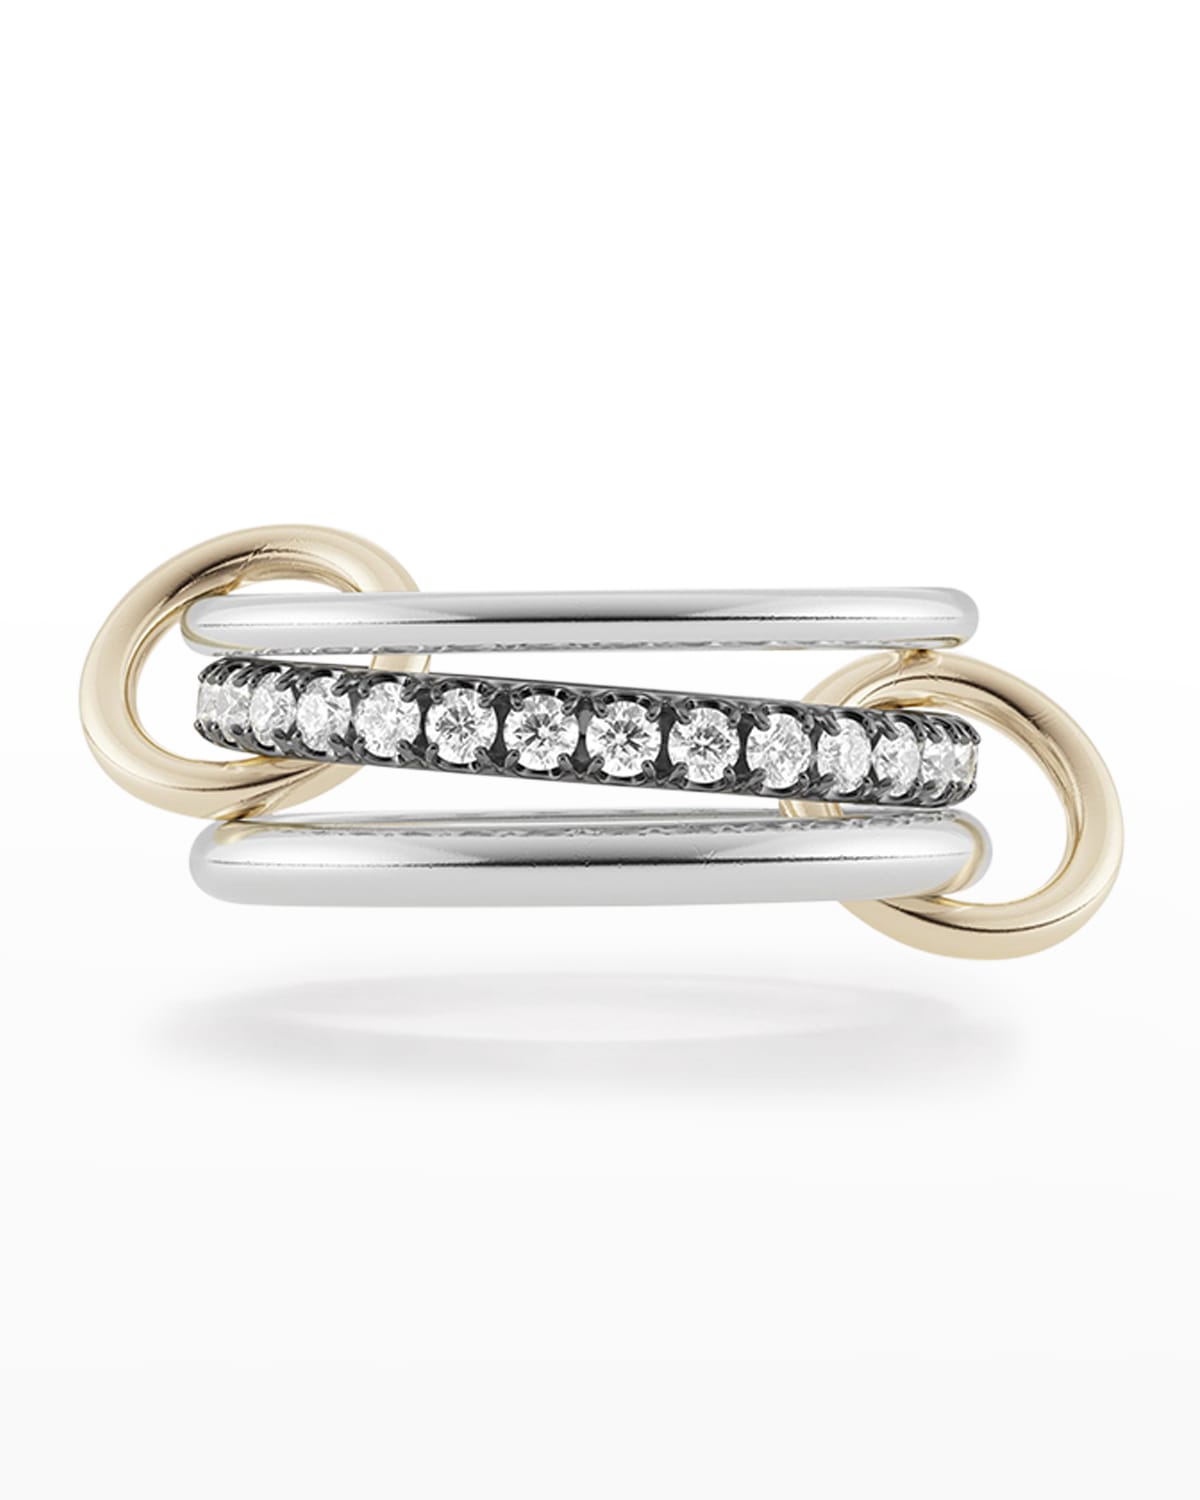 SPINELLI KILCOLLIN 3-LINK RING IN STERLING SILVER WITH DIAMONDS, BLK RHODIUM AND YELLOW GOLD LINKS